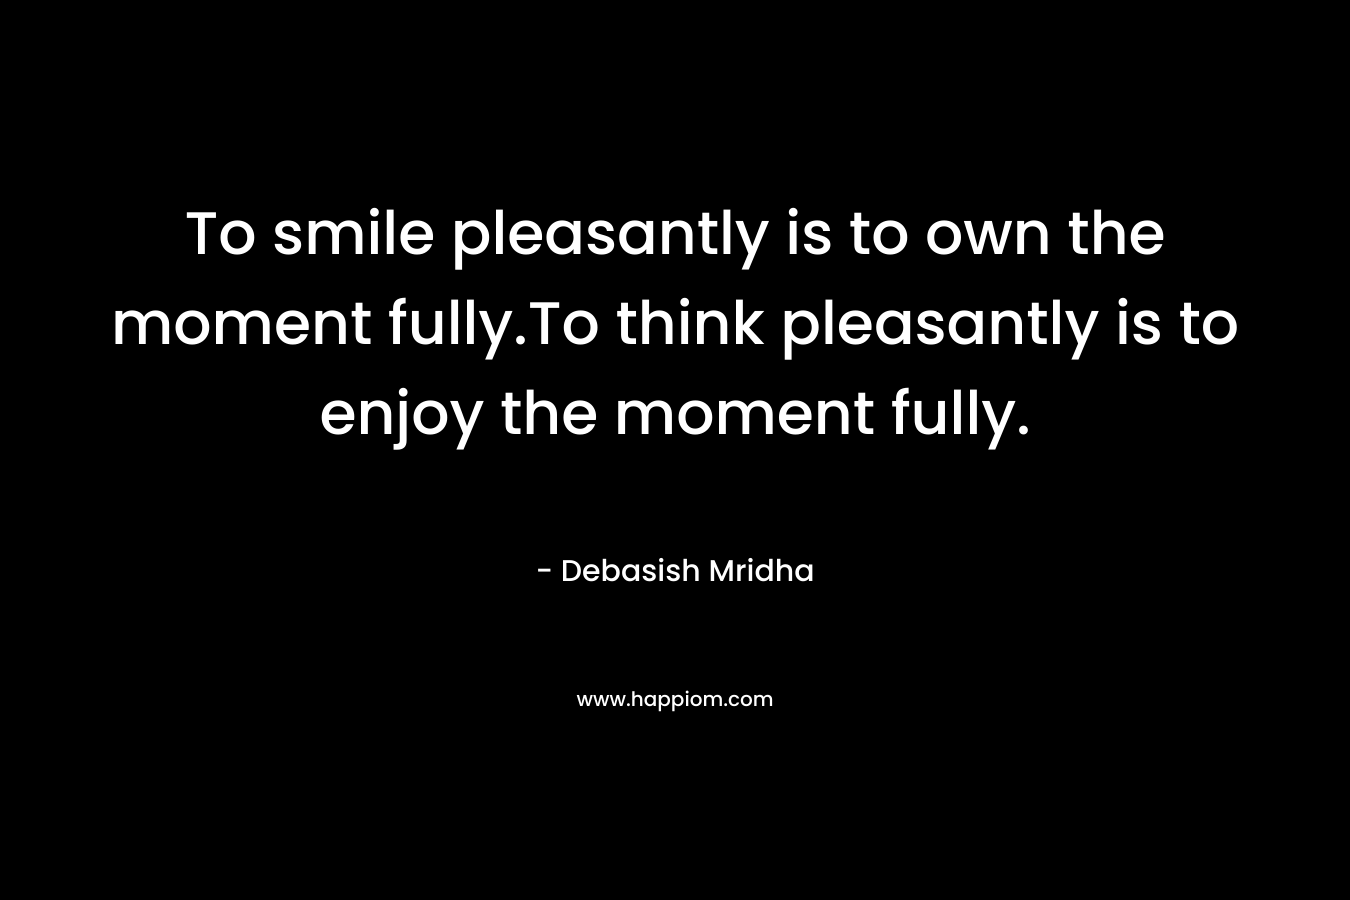 To smile pleasantly is to own the moment fully.To think pleasantly is to enjoy the moment fully.